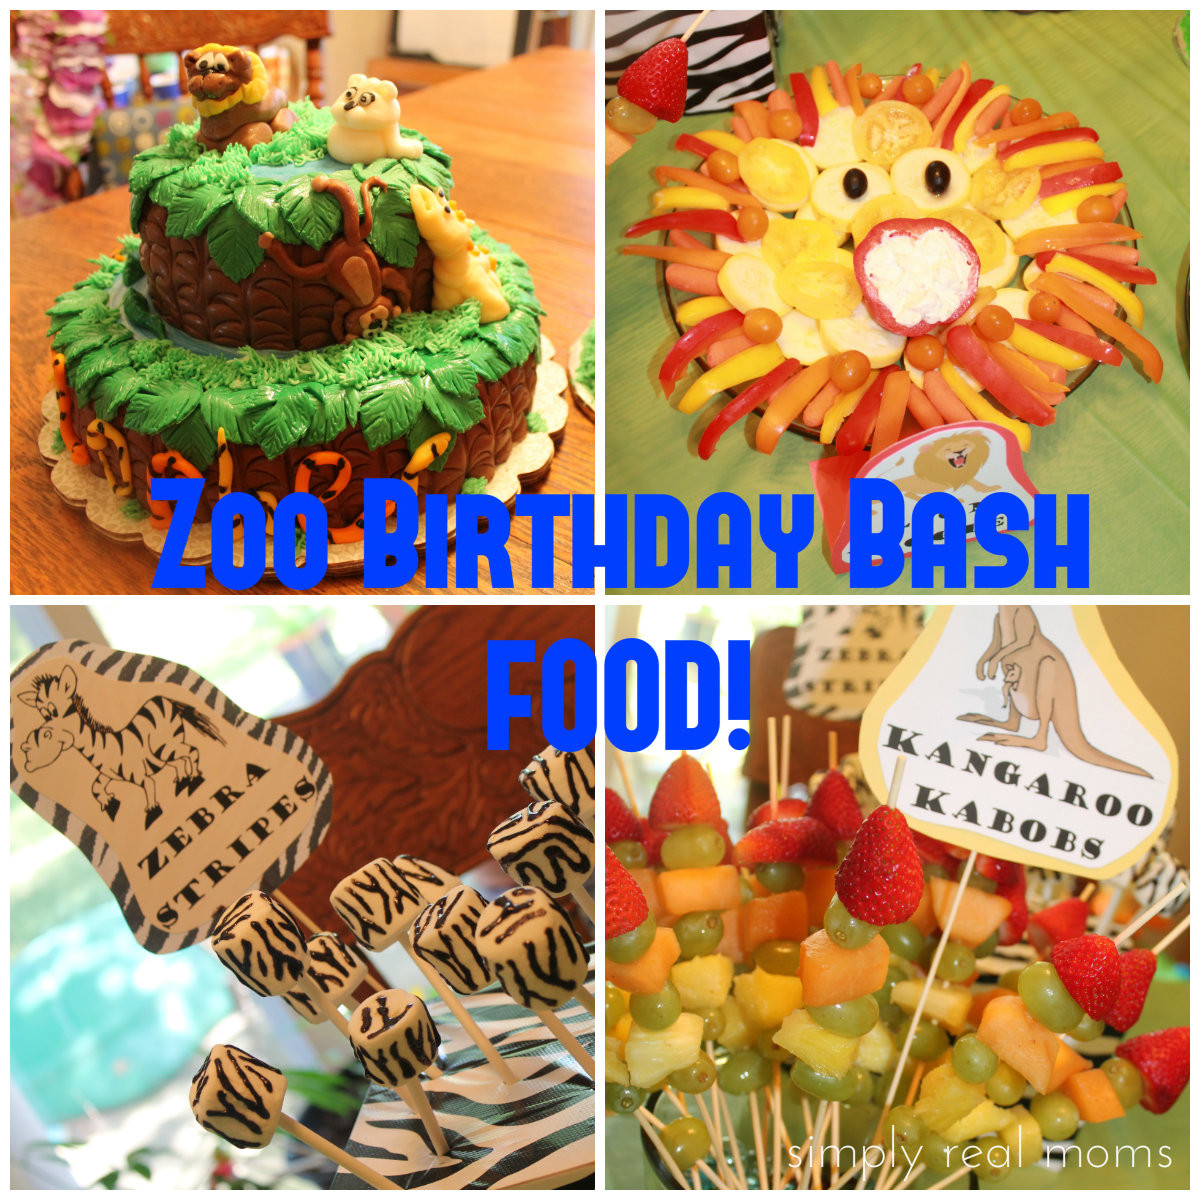 Zoo Birthday Party Food Ideas
 zoo birthday party food ideas Simply Real Moms